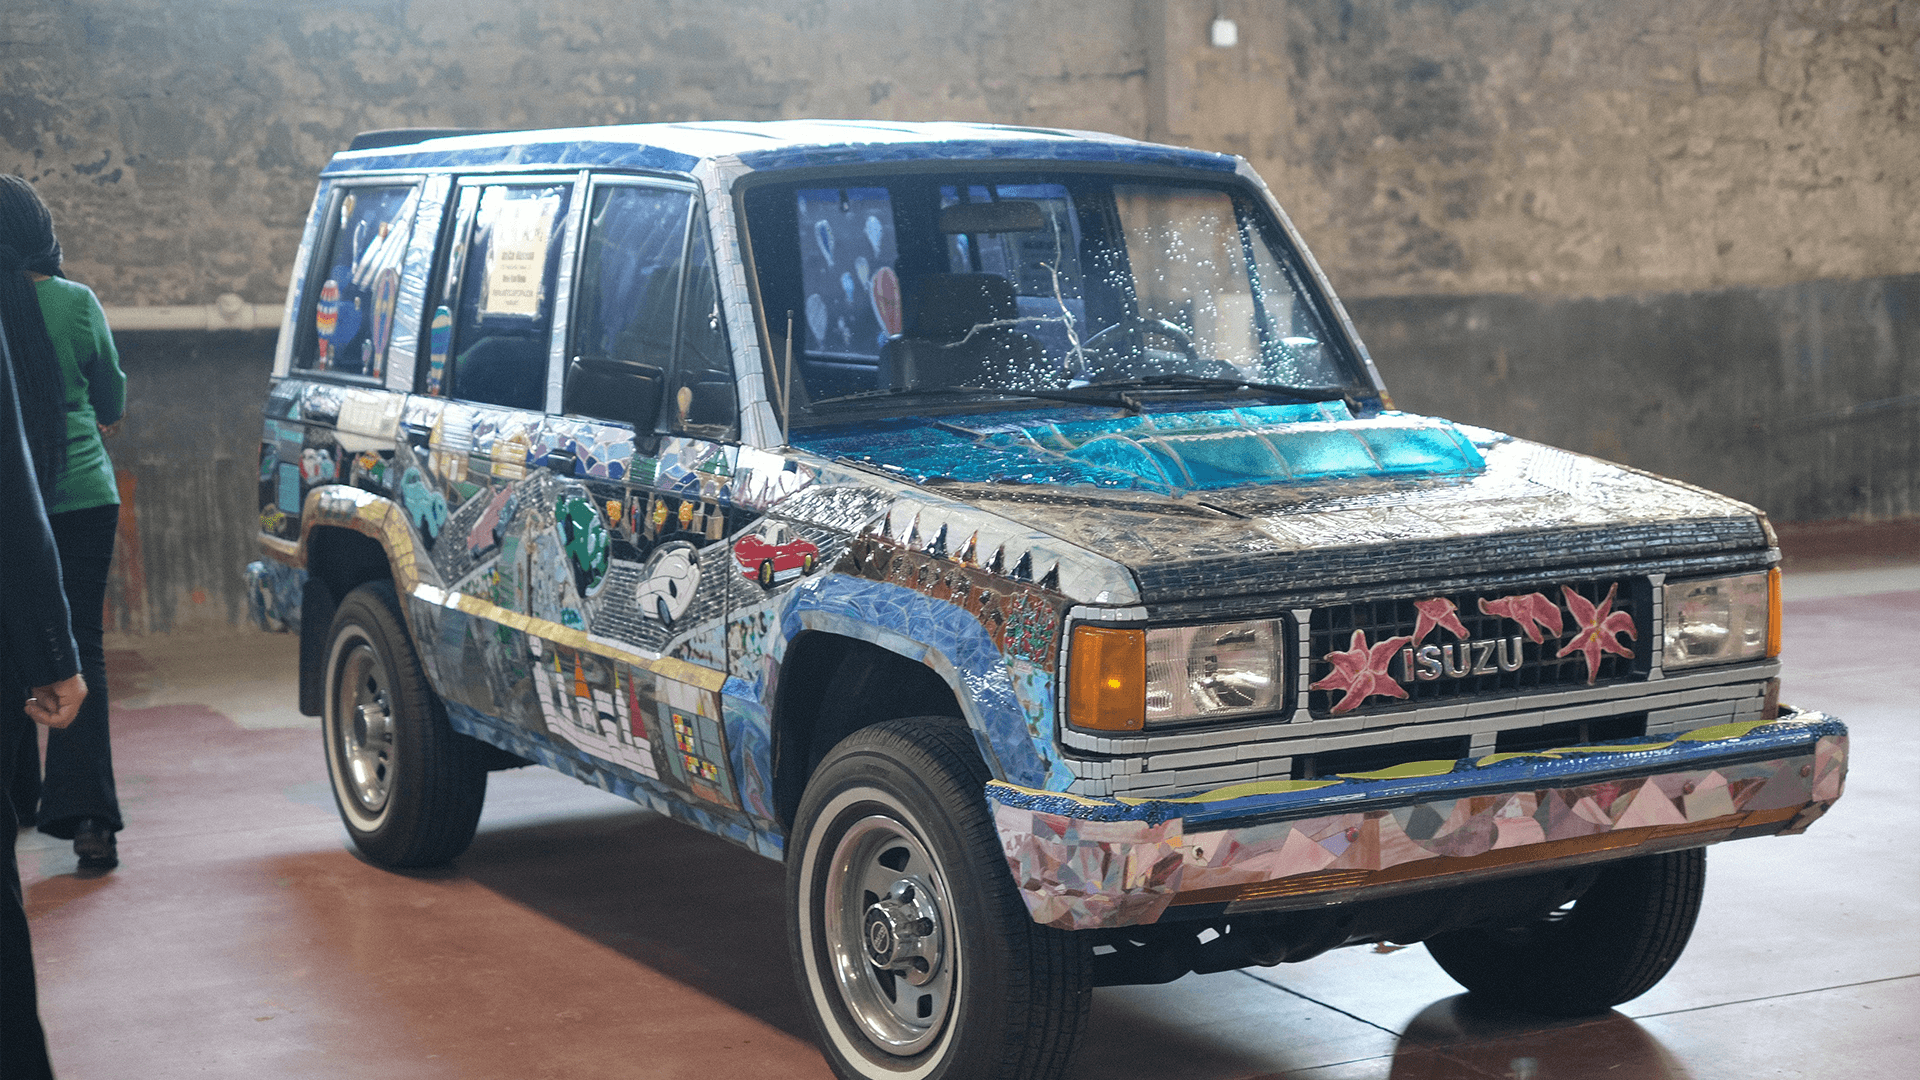 One of the many art cars from the Art Cartopia Museum